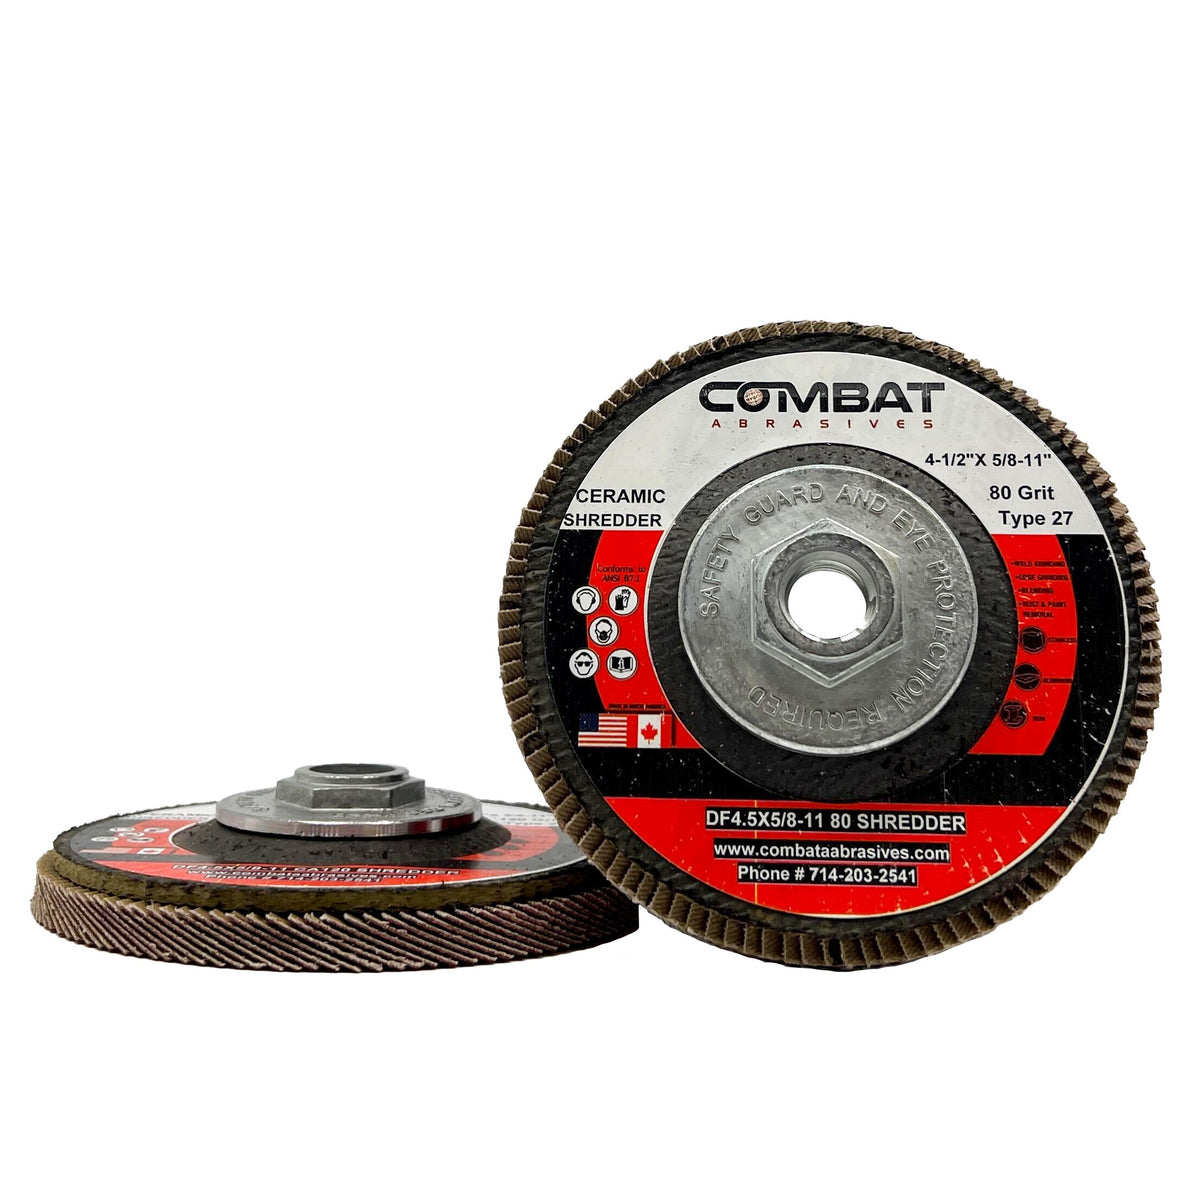 Side and top view of Renegade Products USA Ceramic Shredder Flap Discs, sized 4-1/2&quot; x 5/8-11&quot;, with Hub (Type 29) and labeled as having 5X LIFE! The image showcases the 80 Grit texture and sturdy construction of the discs. Specifically designed for high-performance grinding and polishing, these flap discs offer a long-lasting and efficient solution for metalworking professionals.